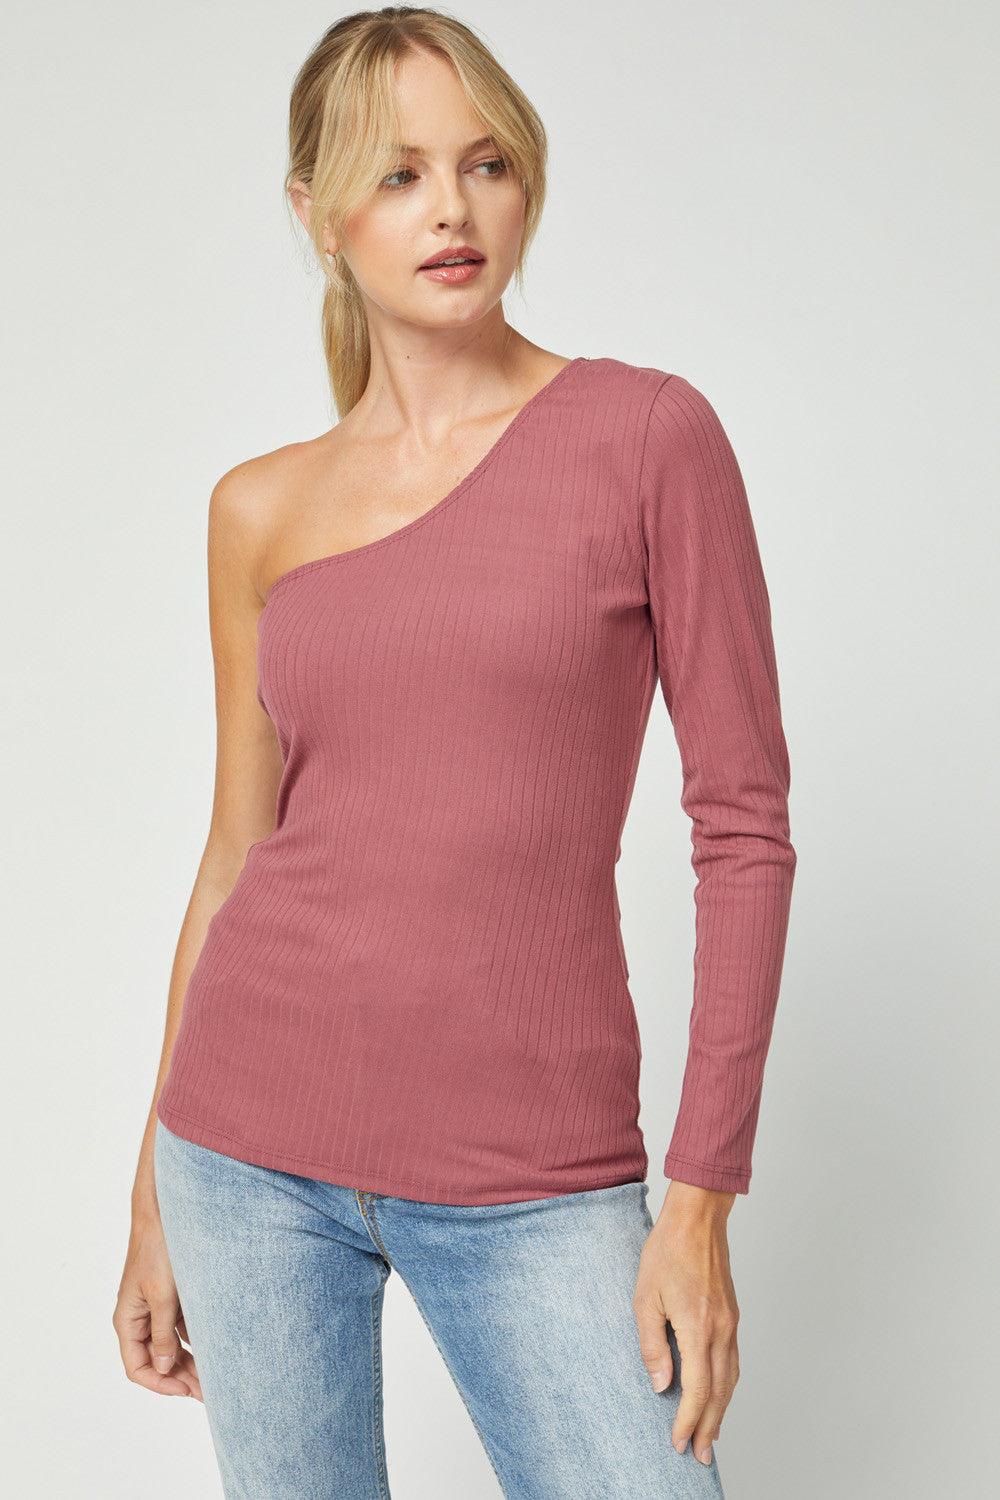 Ribbed one sleeve top-Tops-Long Sleeve-Entro-Mauve-6049-1-RK Collections Boutique